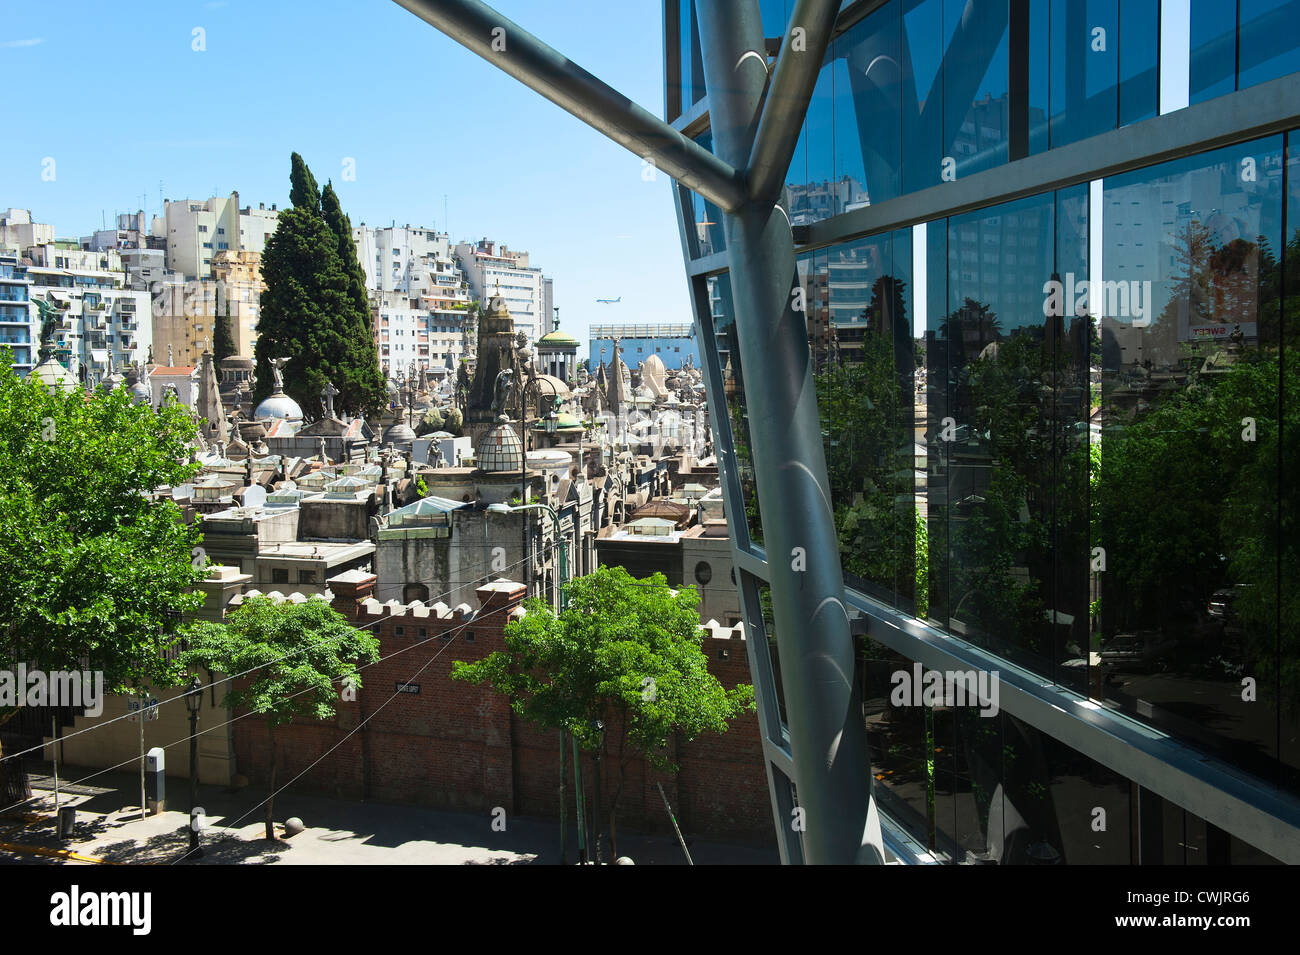 Recoleta cemetery viewed through the windows of a commercial mall, Buenos Aires, Argentina Stock Photo